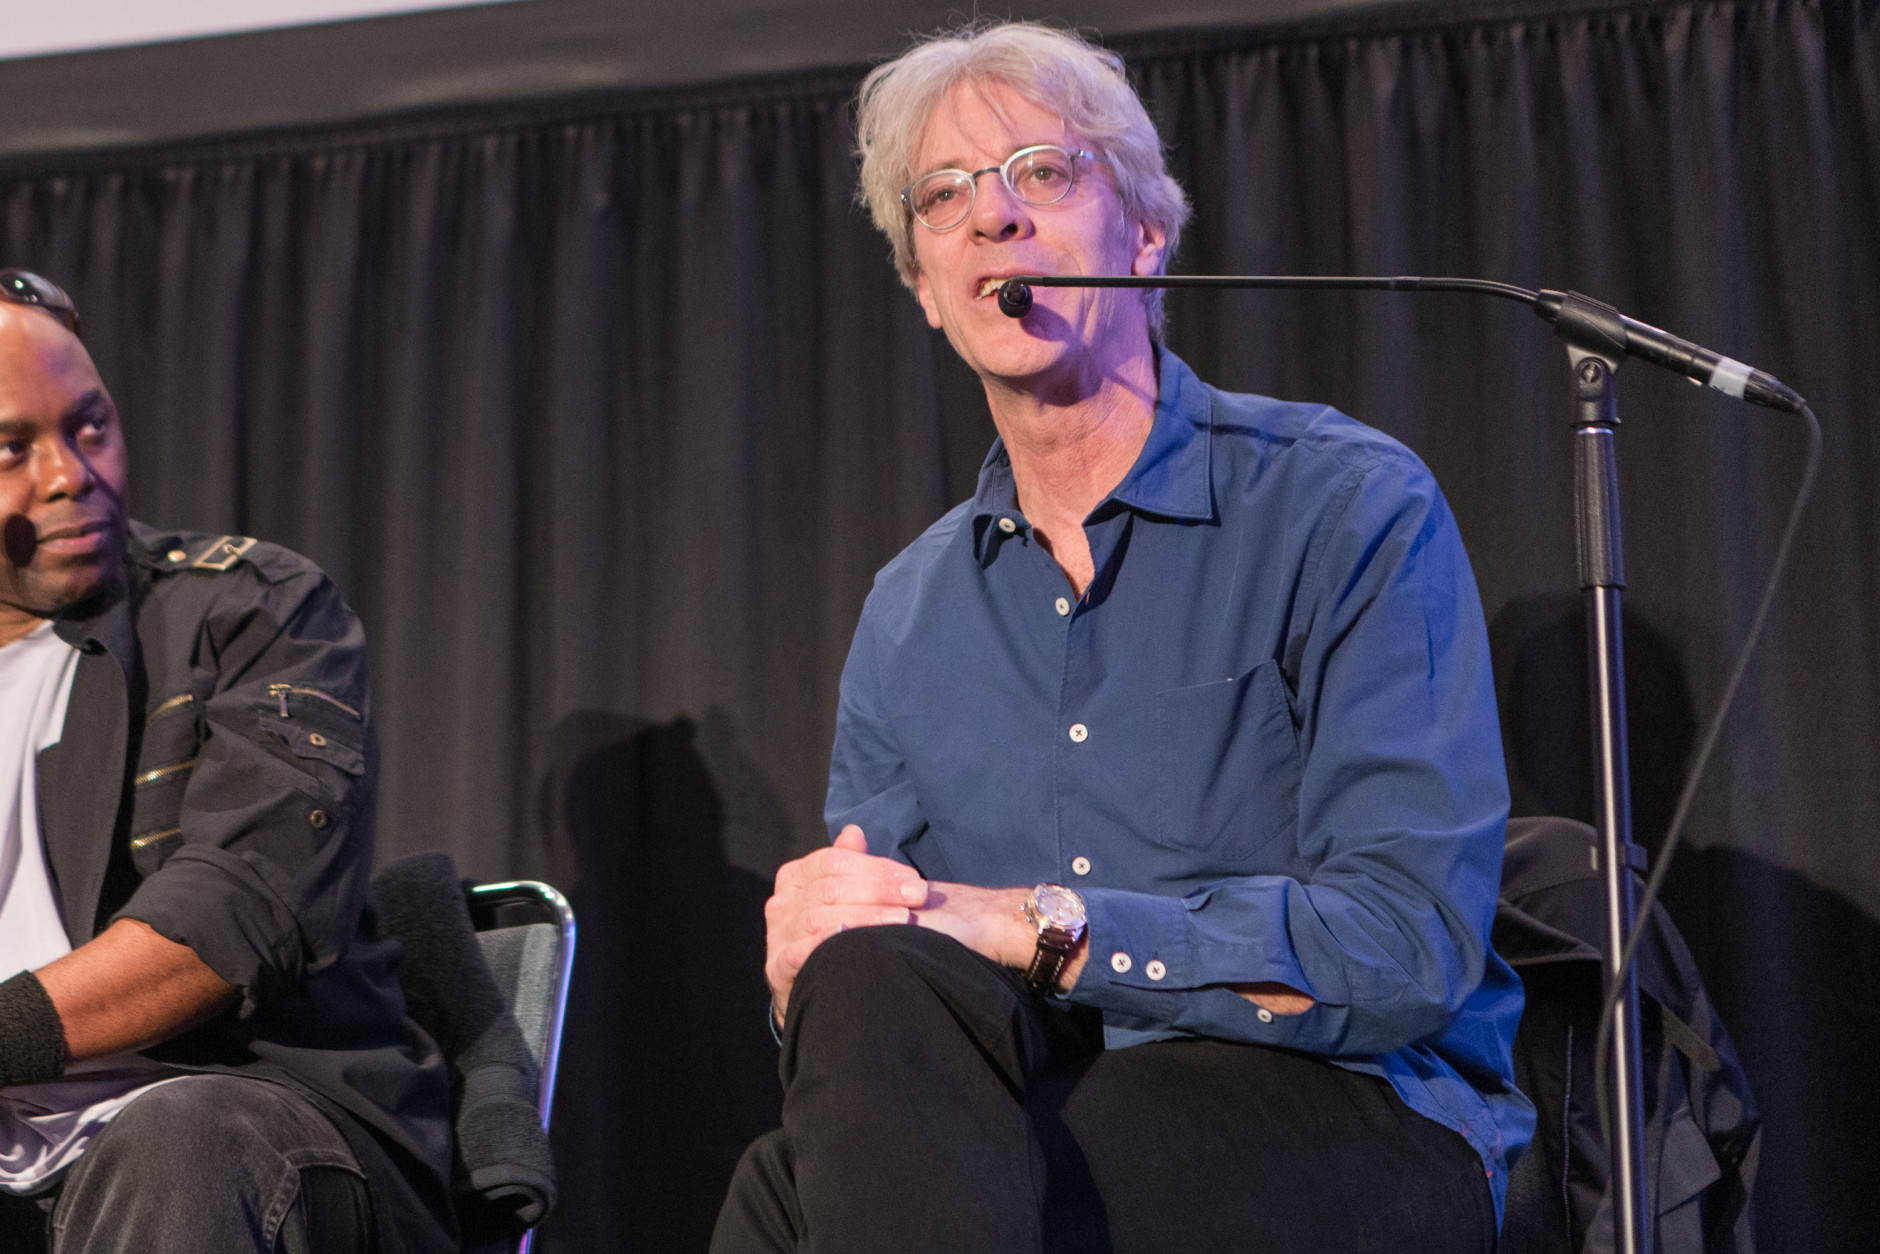 Drummer Stewart Copeland, formerly of The Police, turns 63 Friday. (Photo by Paul A. Hebert/Invision/AP)